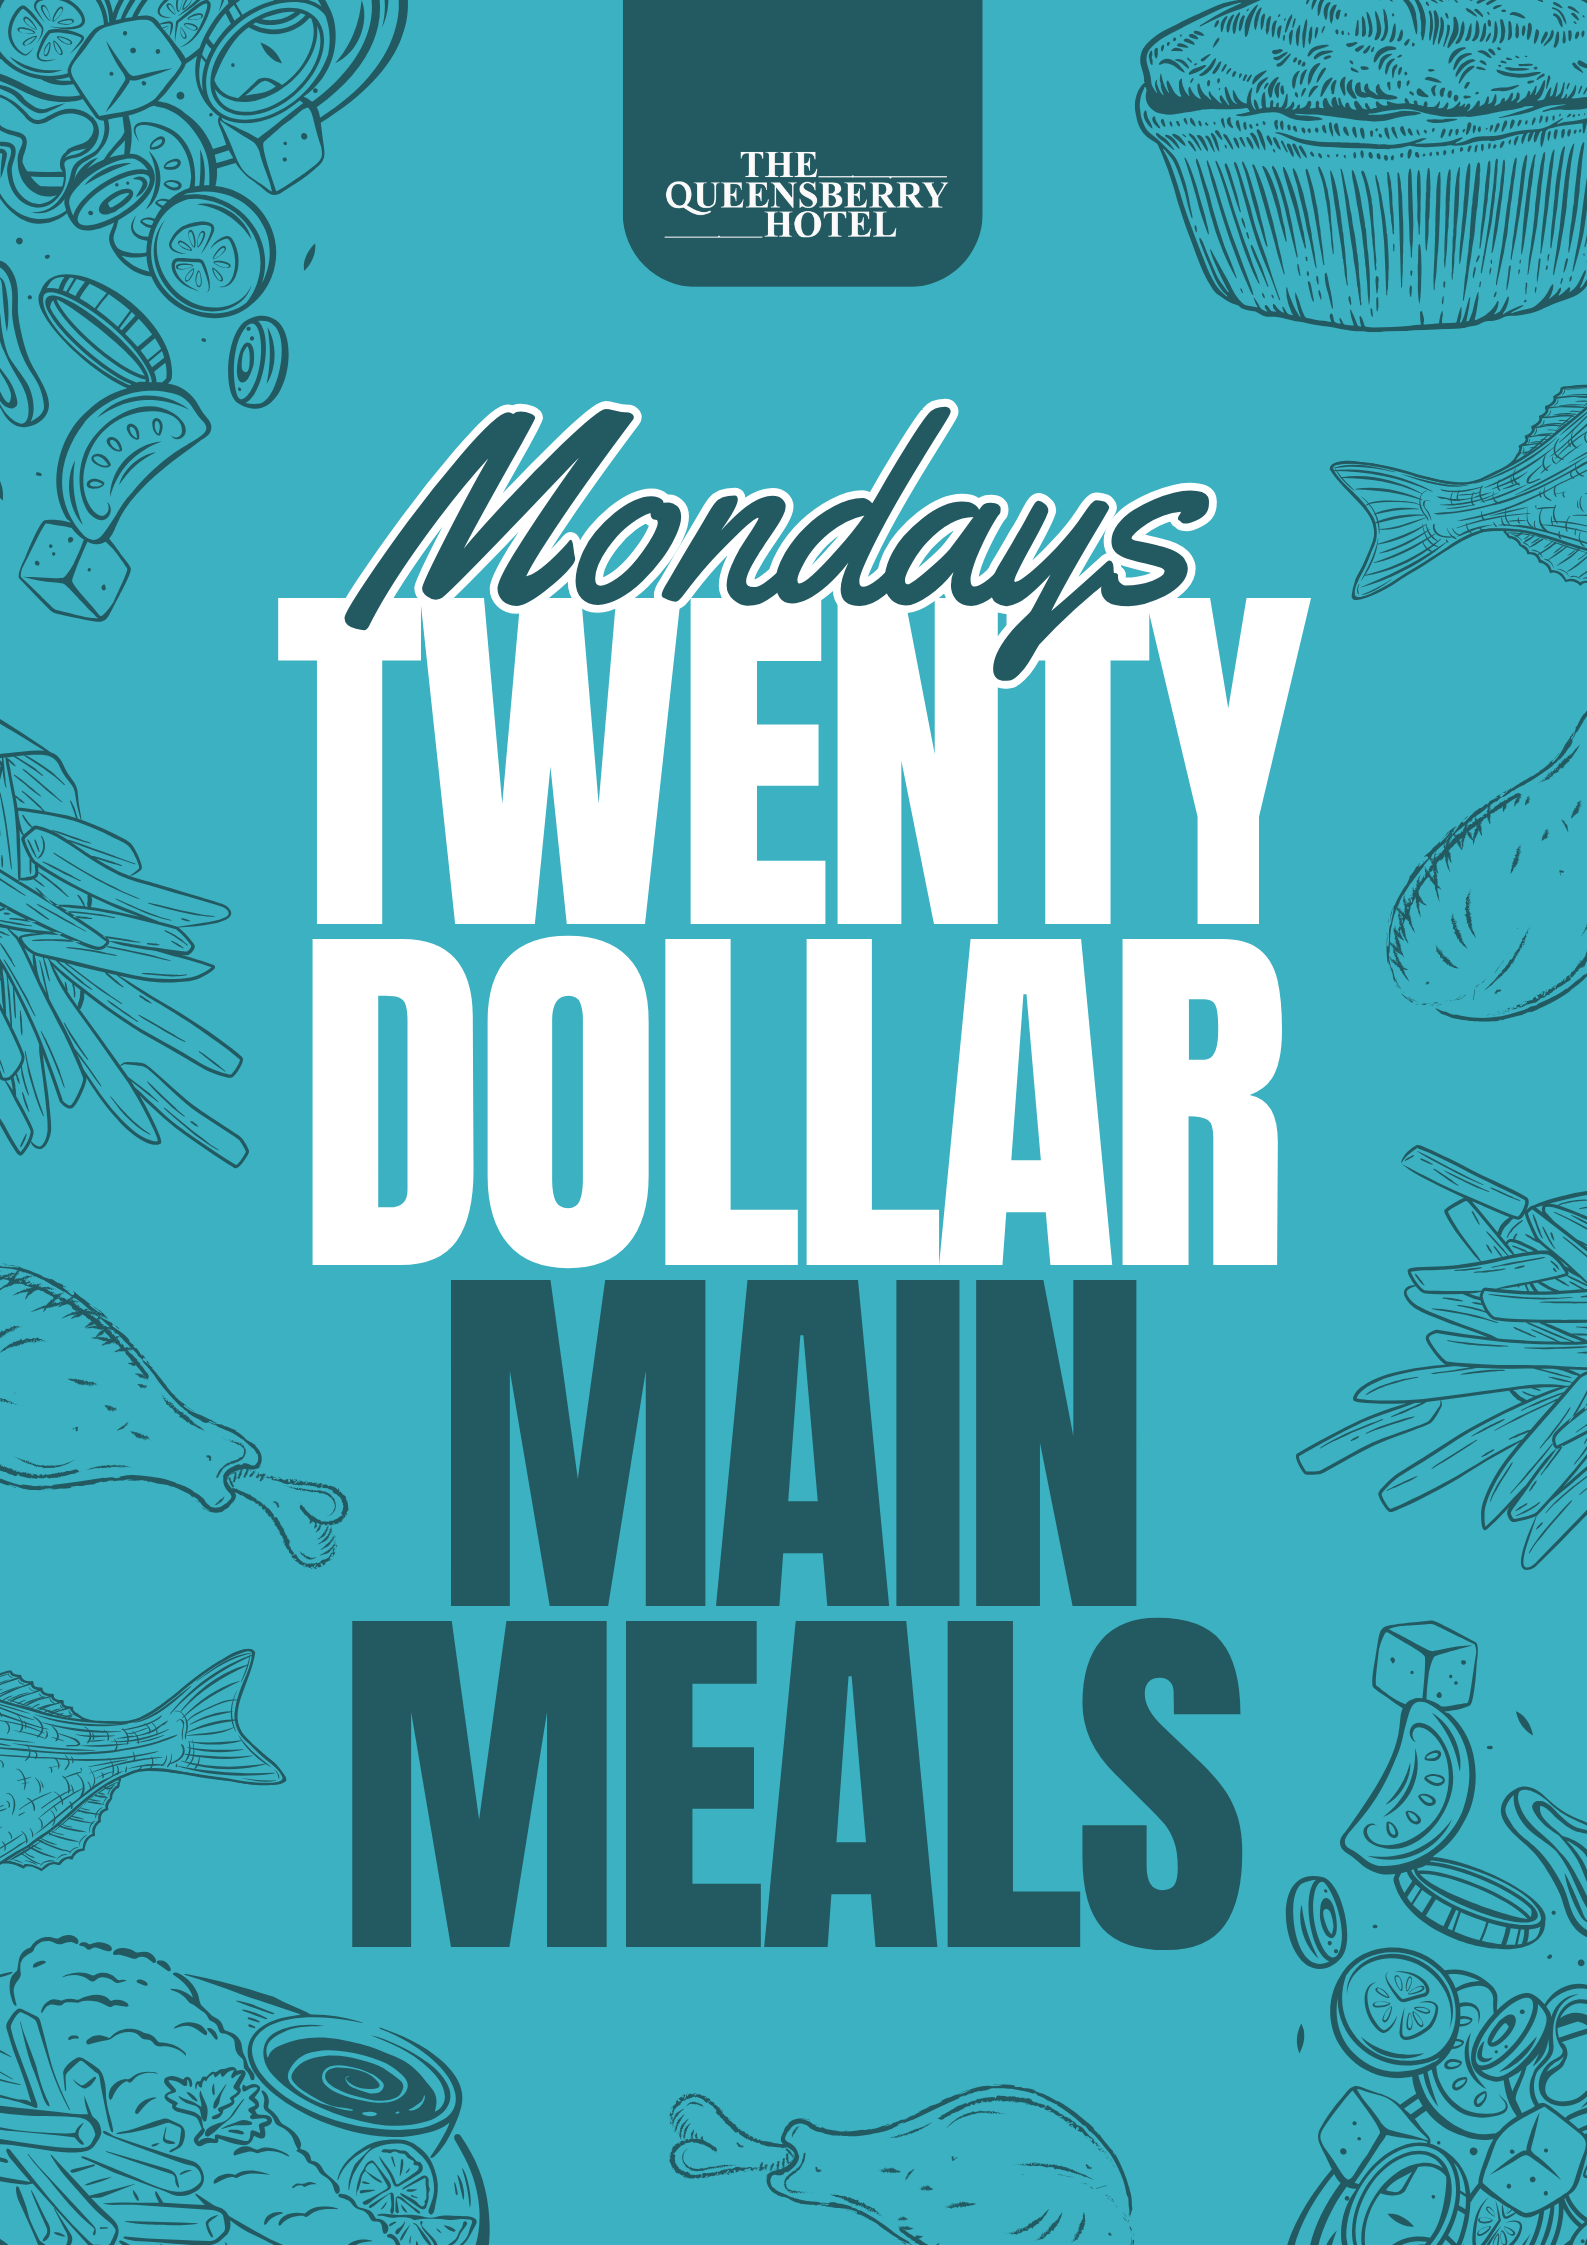 Monday Special | $20 Main Meals